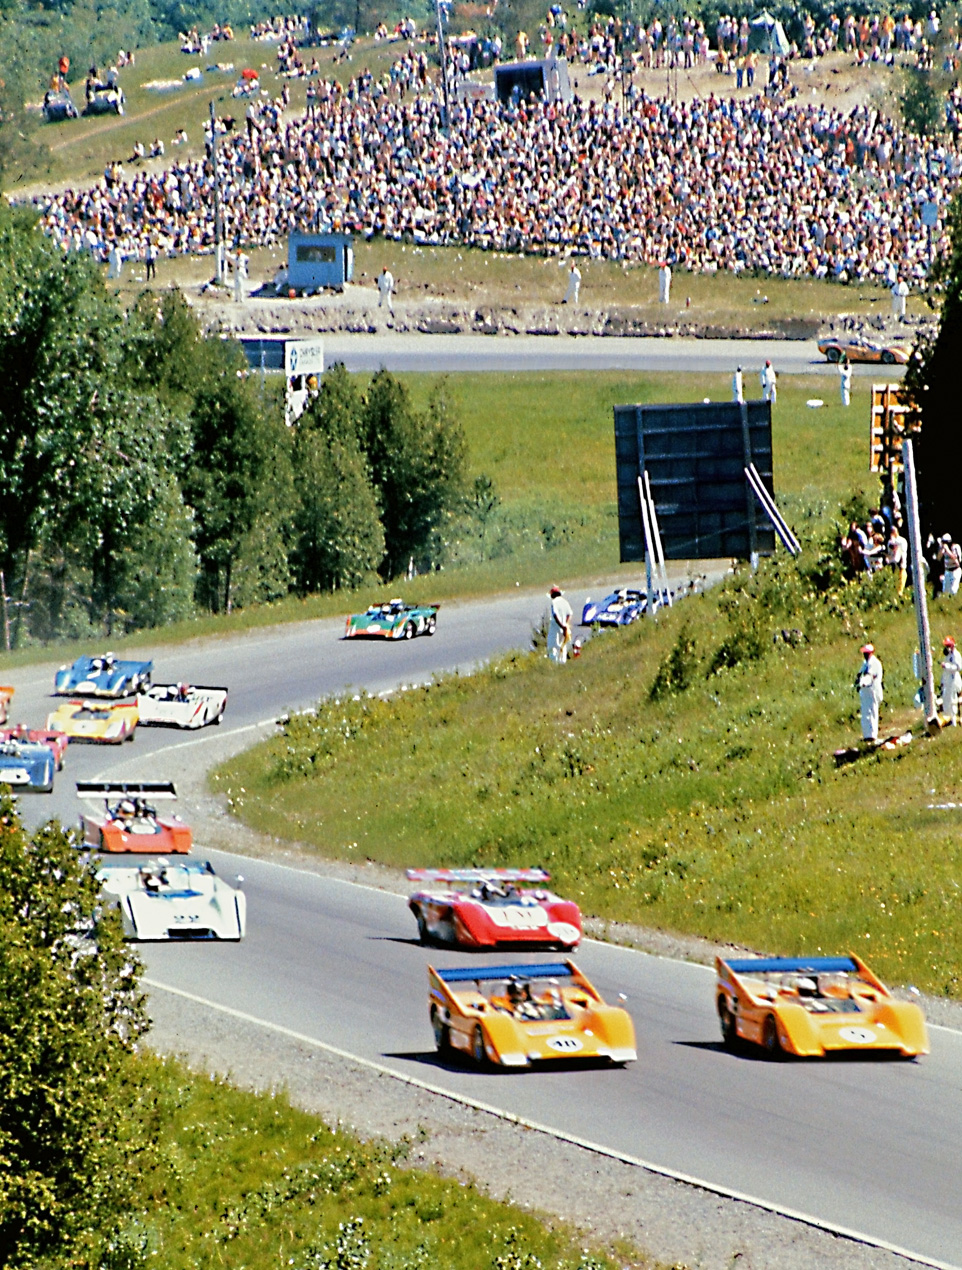 The pace lap of the 1970 Watkins Glen CanAm race, with two McClaren Chevys leading the field. Lots of fans enjoying a sunny, hot race day. View full size.